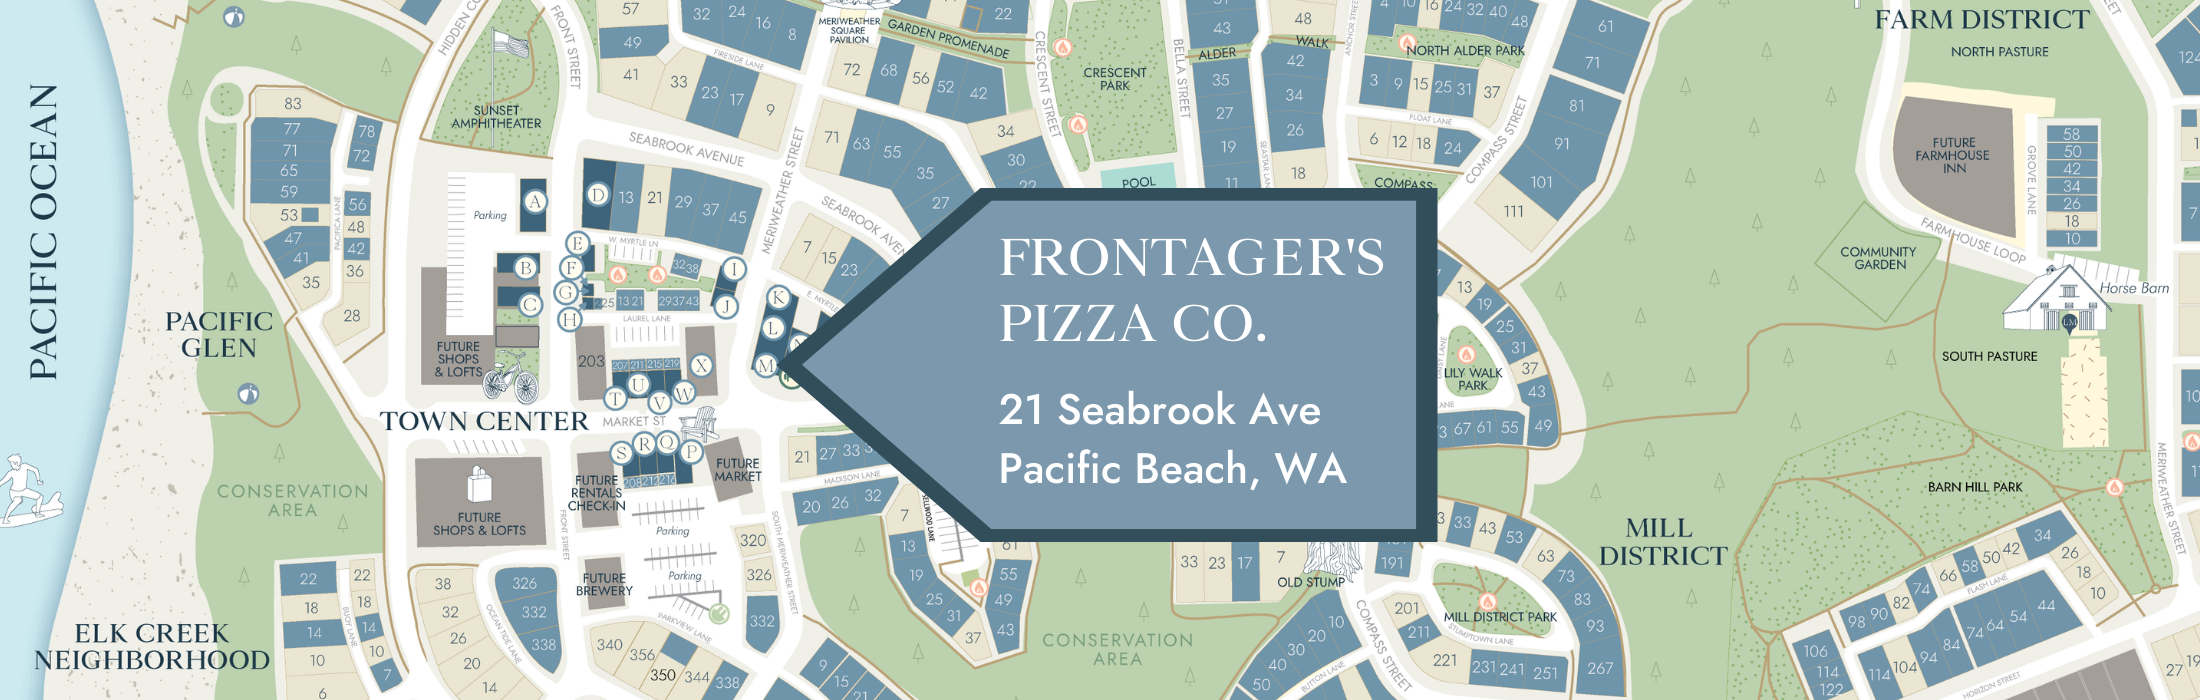 Frontager's Pizza Co Location In Seabrook